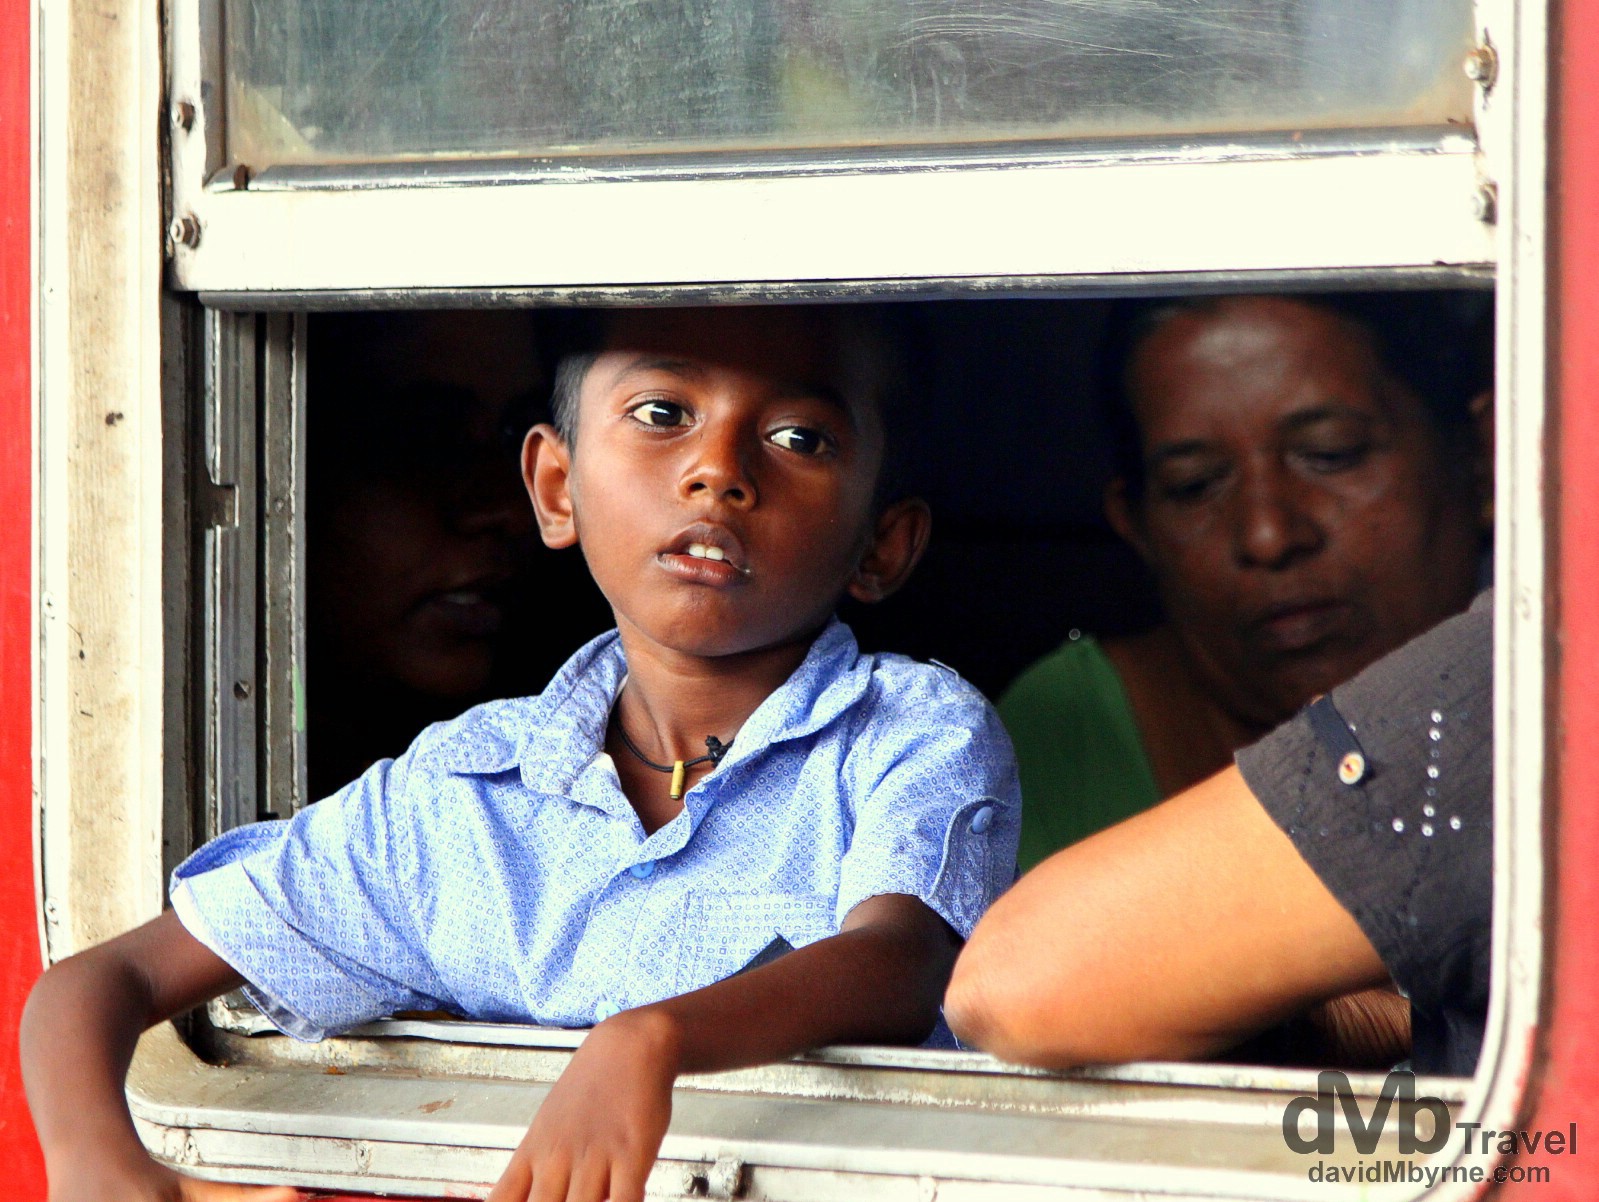 Waiting to depart Galle train station in southern Sri Lanka, August 31st 2012.